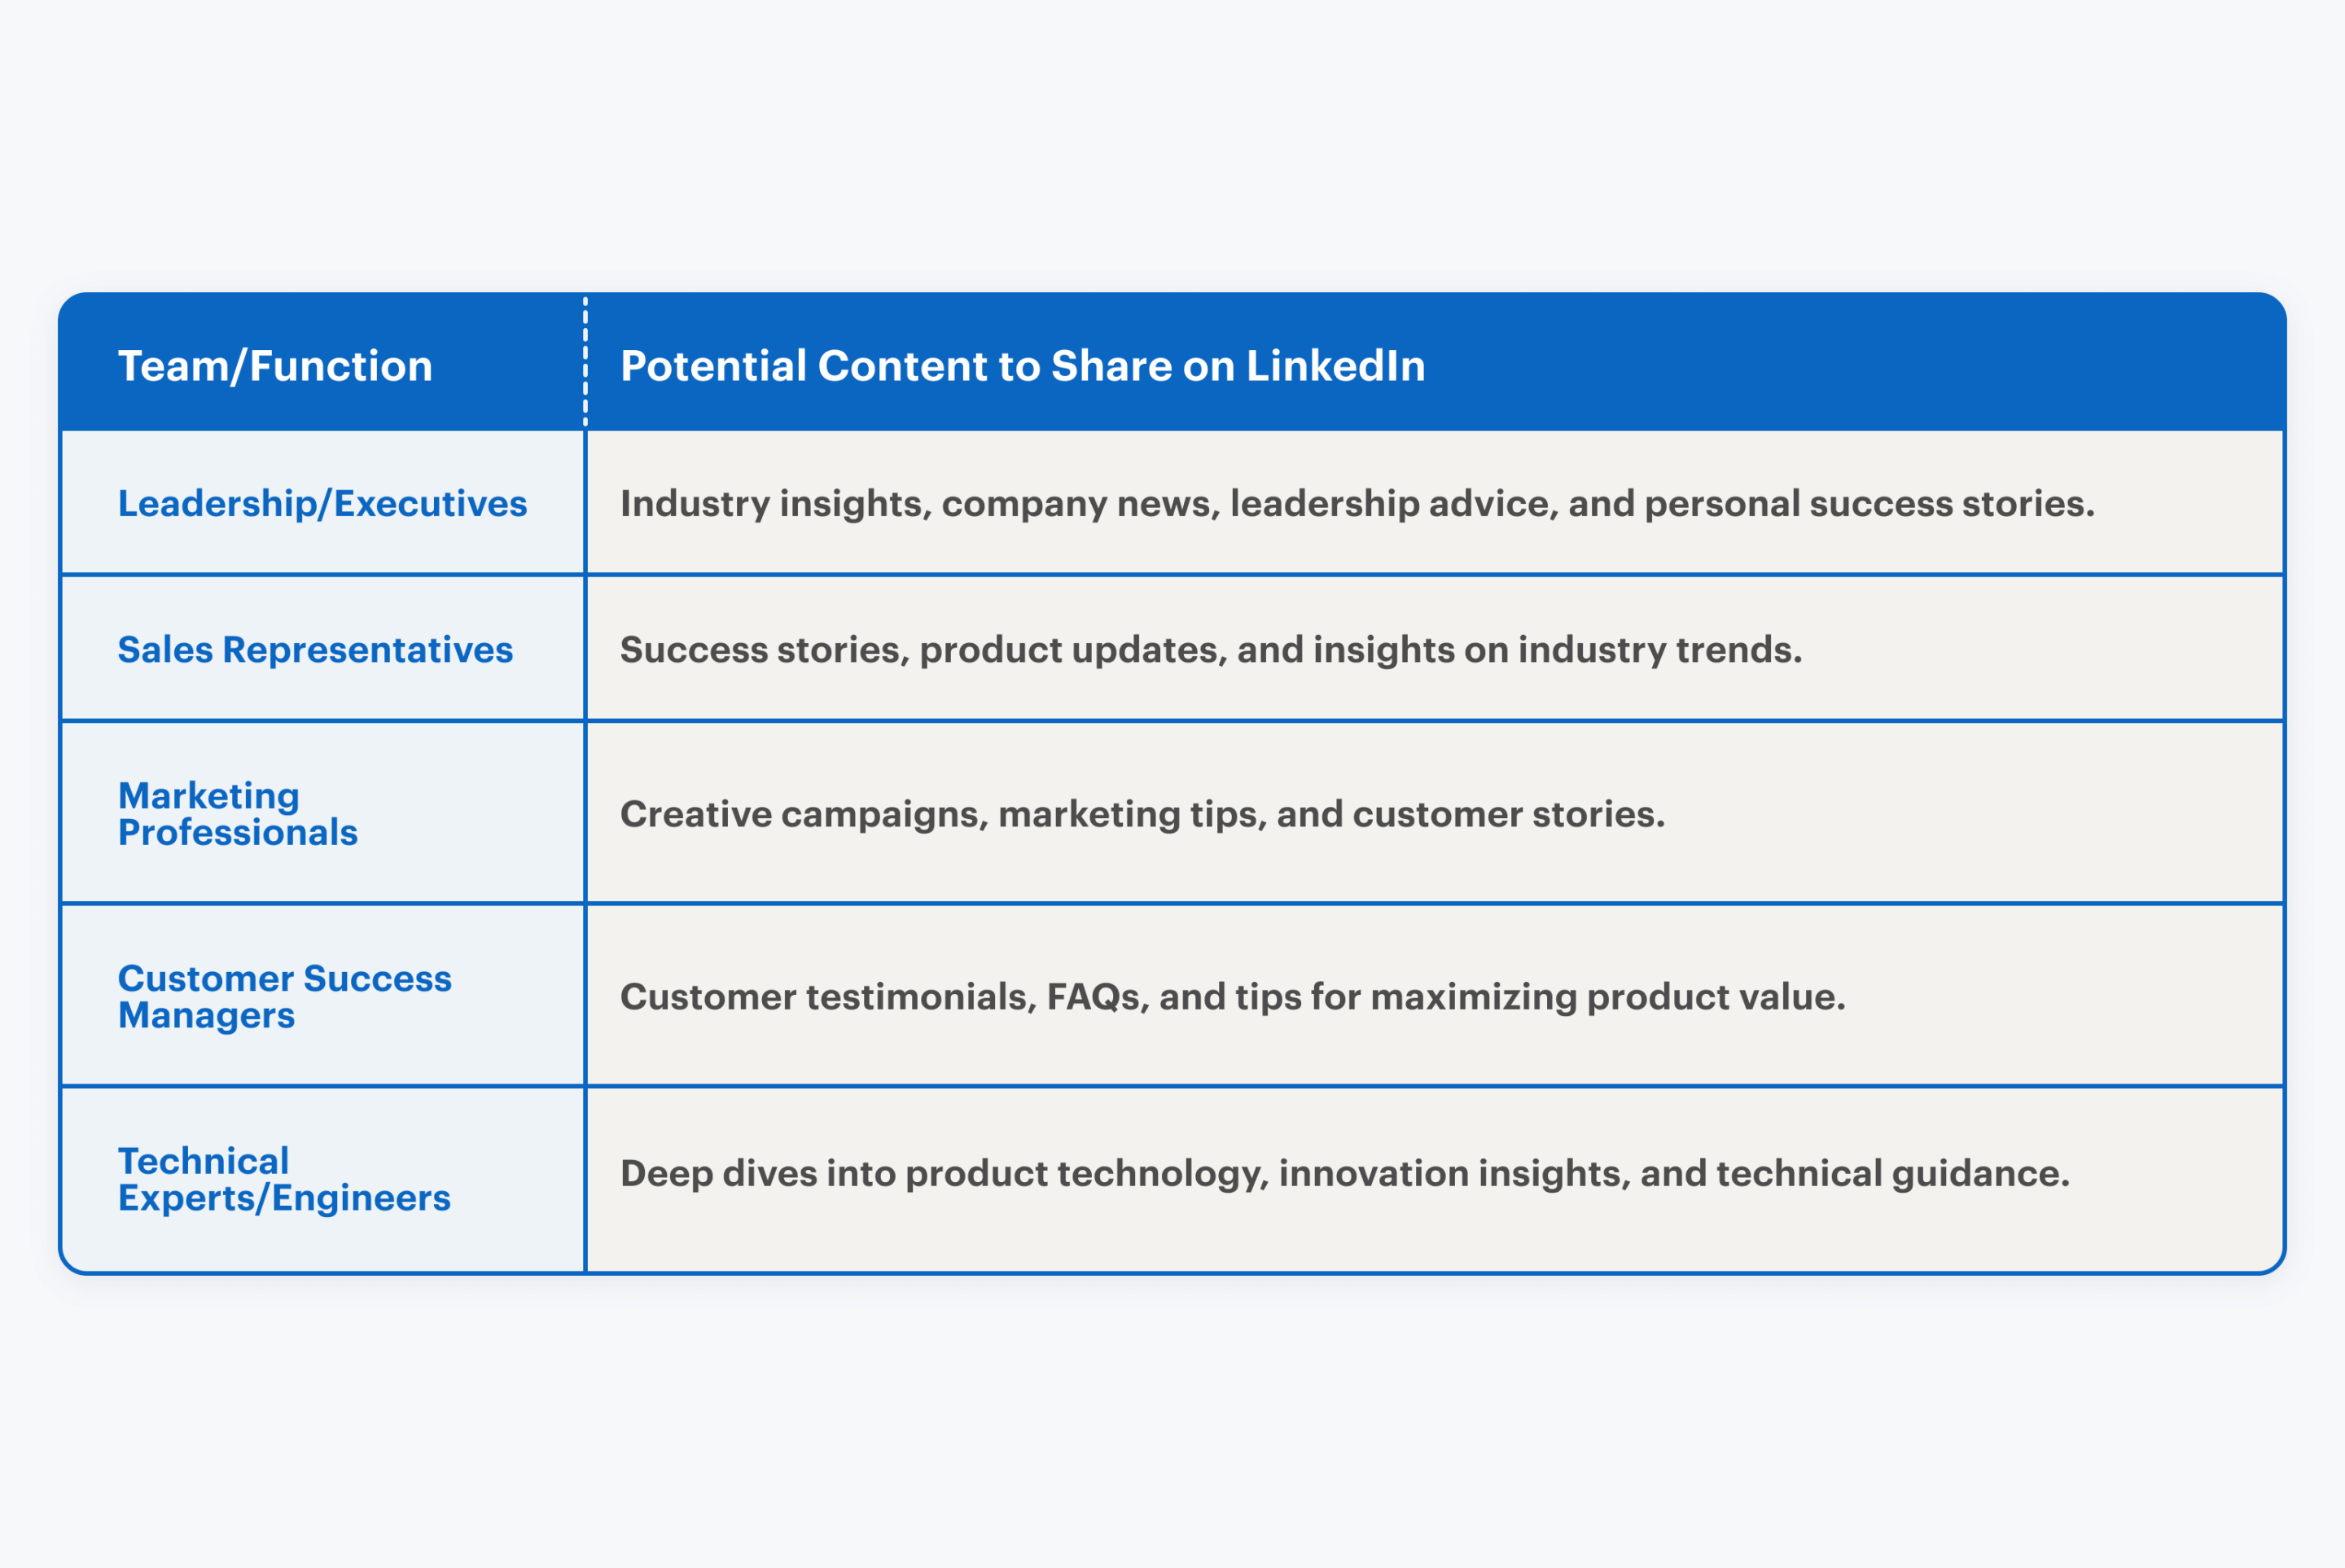 A table showing different types of content that company executives could be sharing on LinkedIn